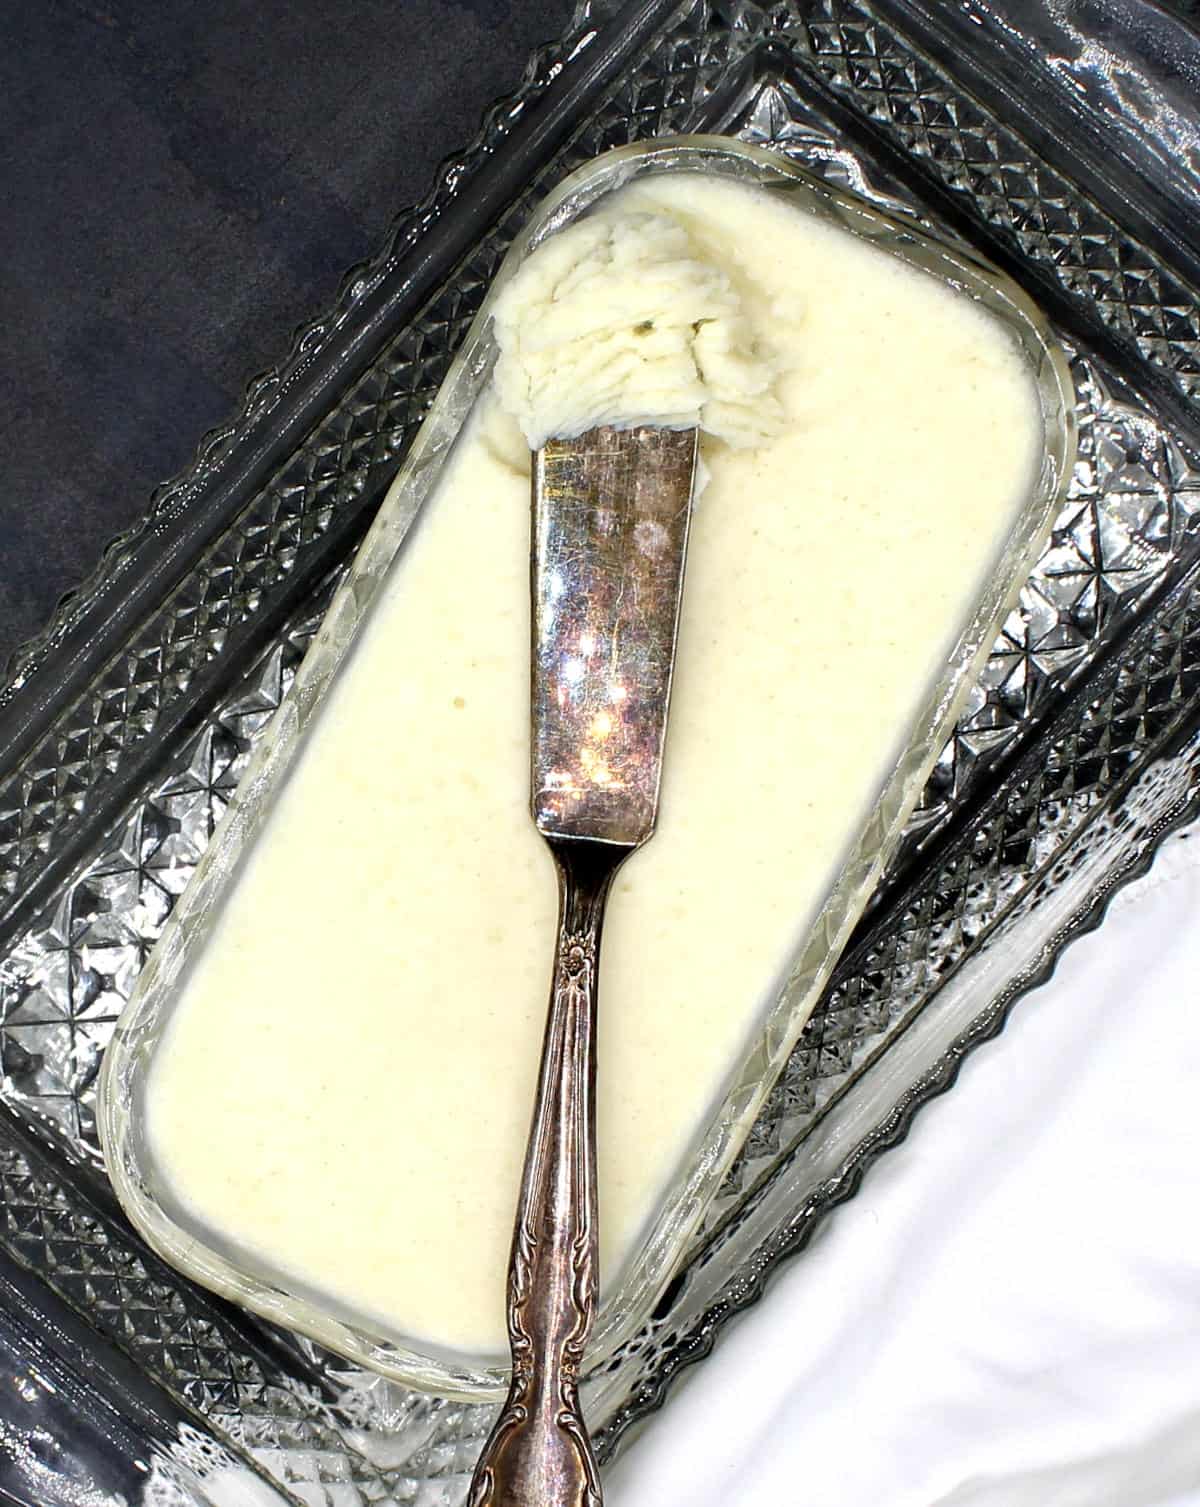 Spreadable vegan butter in crystal butter dish with butter knife.